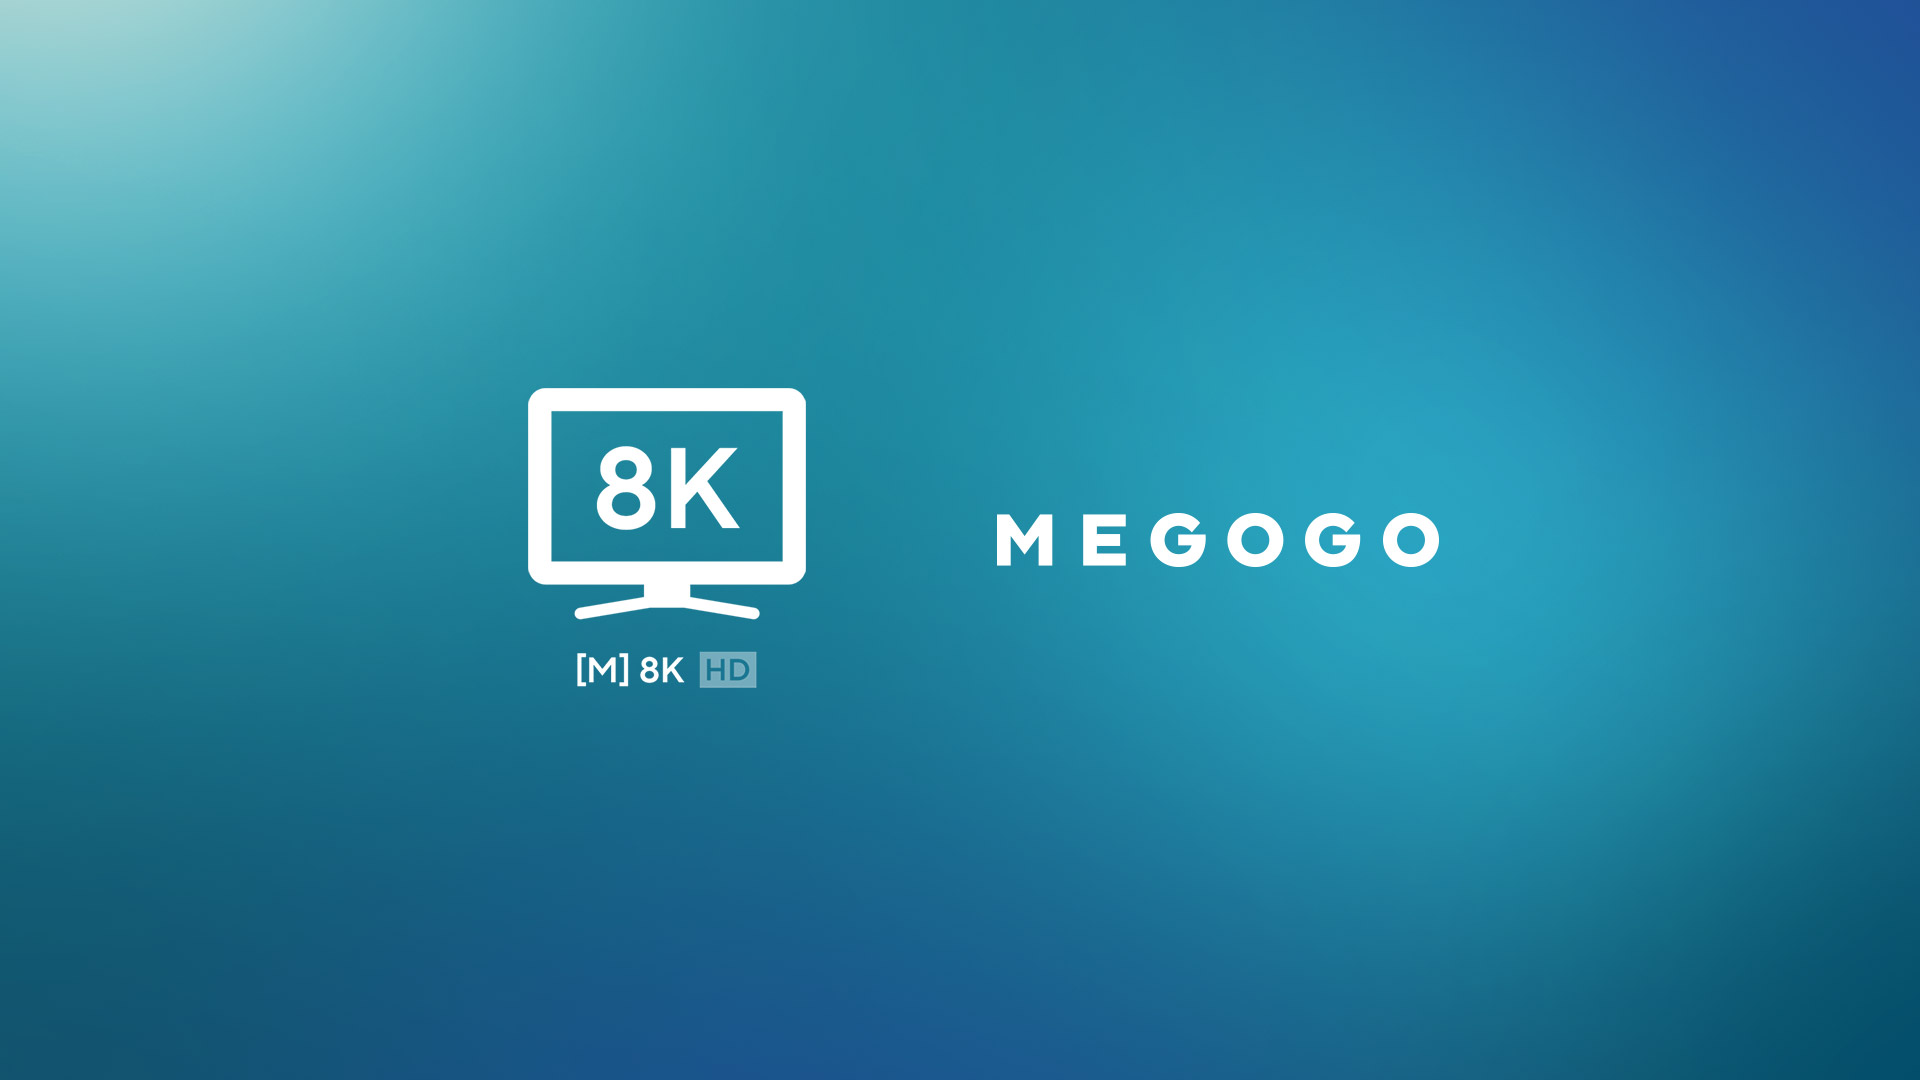 MEGOGO launches the first channel in Ukraine to broadcast with 8K resolution